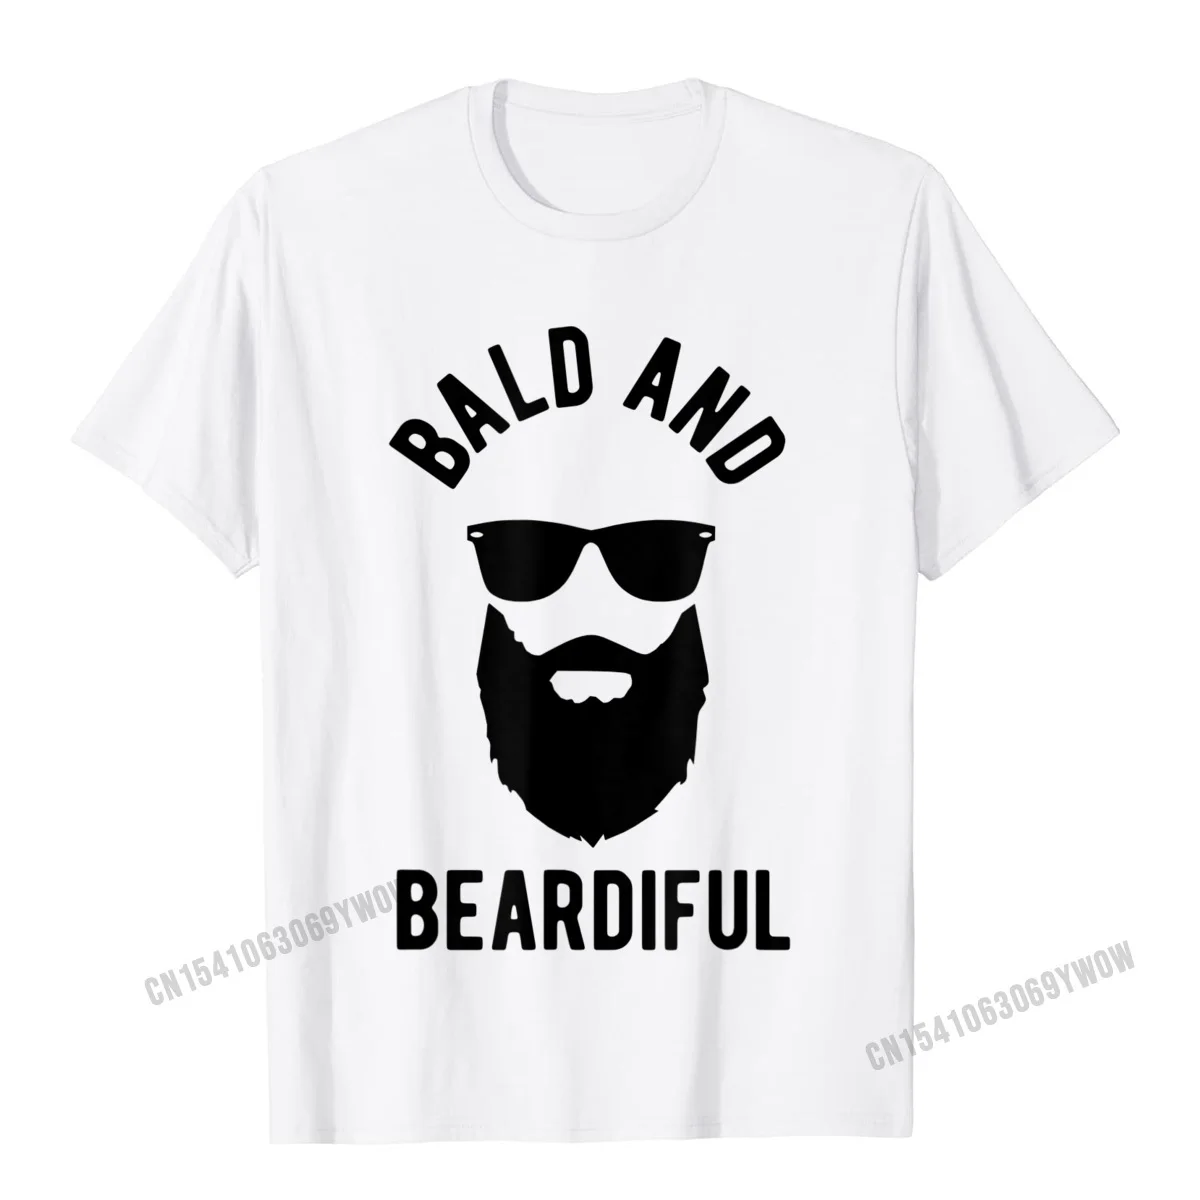 Mens Bald and Beardiful T-Shirt__196 100% Cotton Tshirts for Men Tops Shirts Discount Summer Round Collar Tops & Tees Custom Mens Bald and Beardiful T-Shirt__196 white